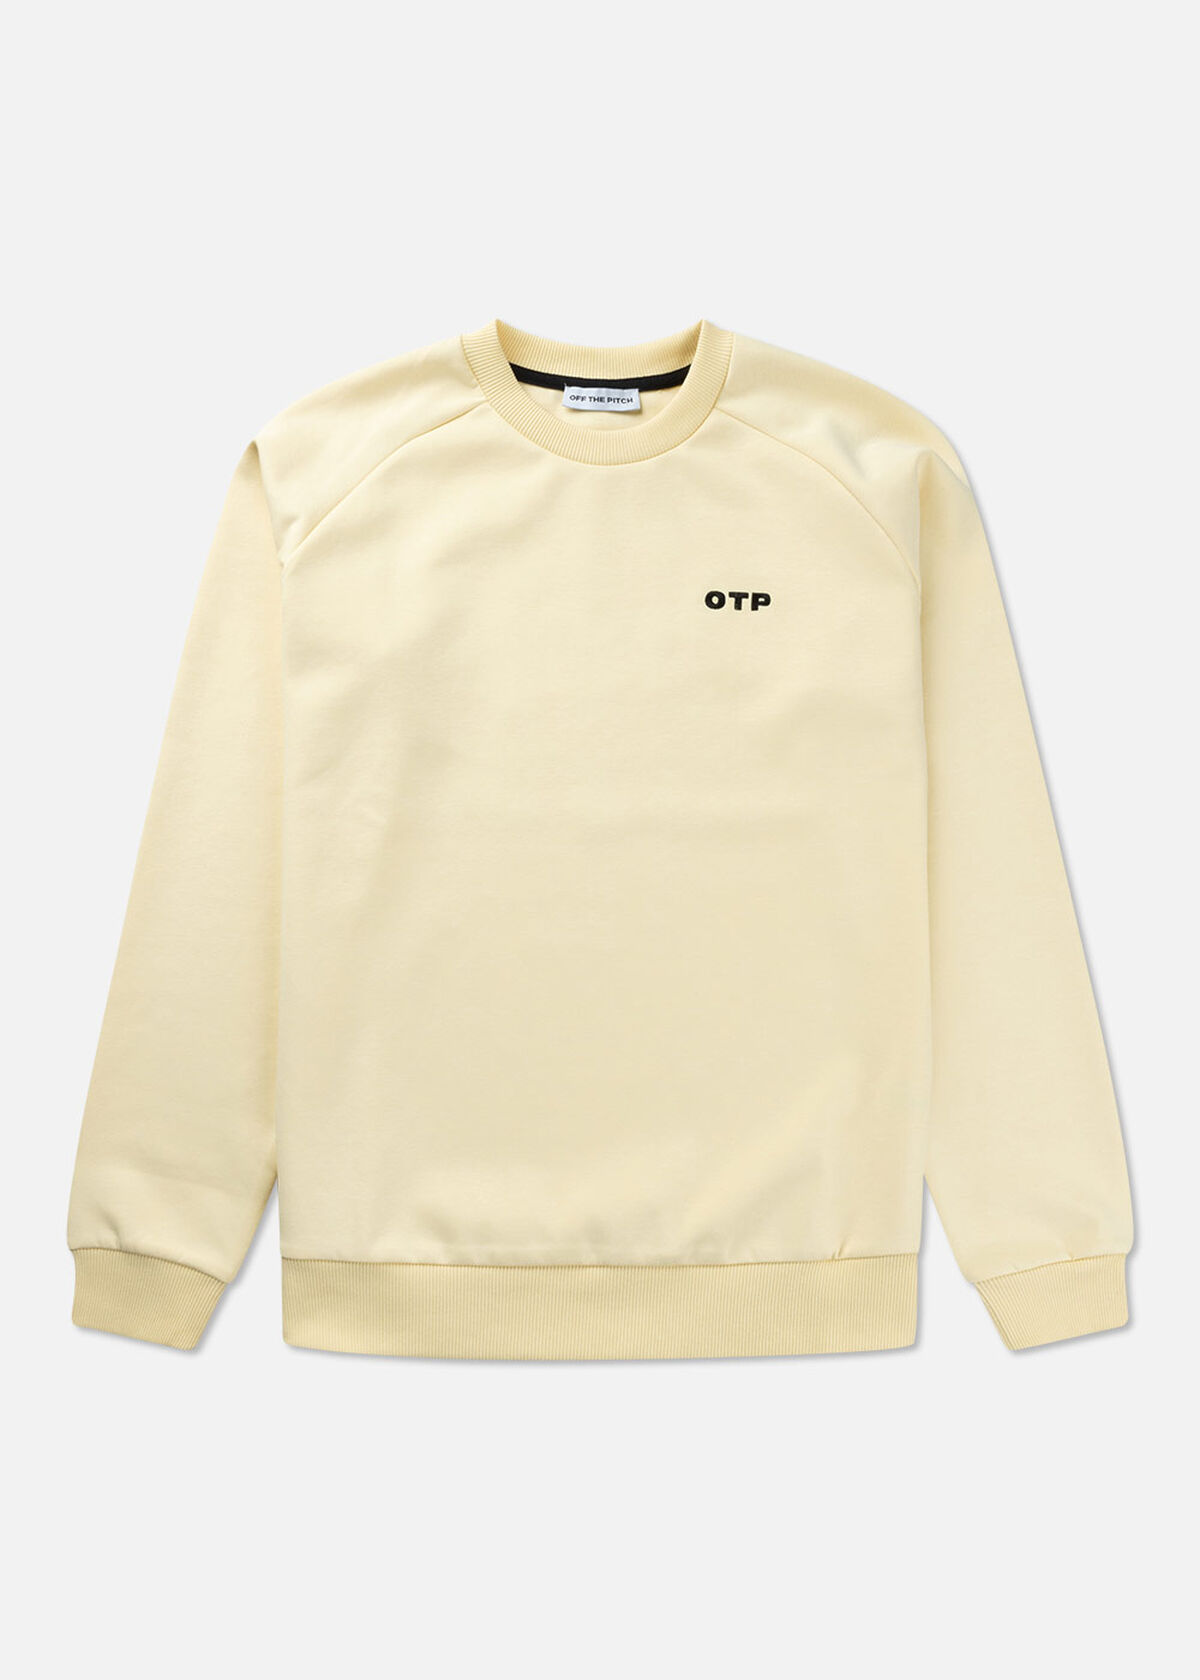 Westgate Tech Sweat - 75%Cotton / 20%Polyester / 5, Yellow, hi-res